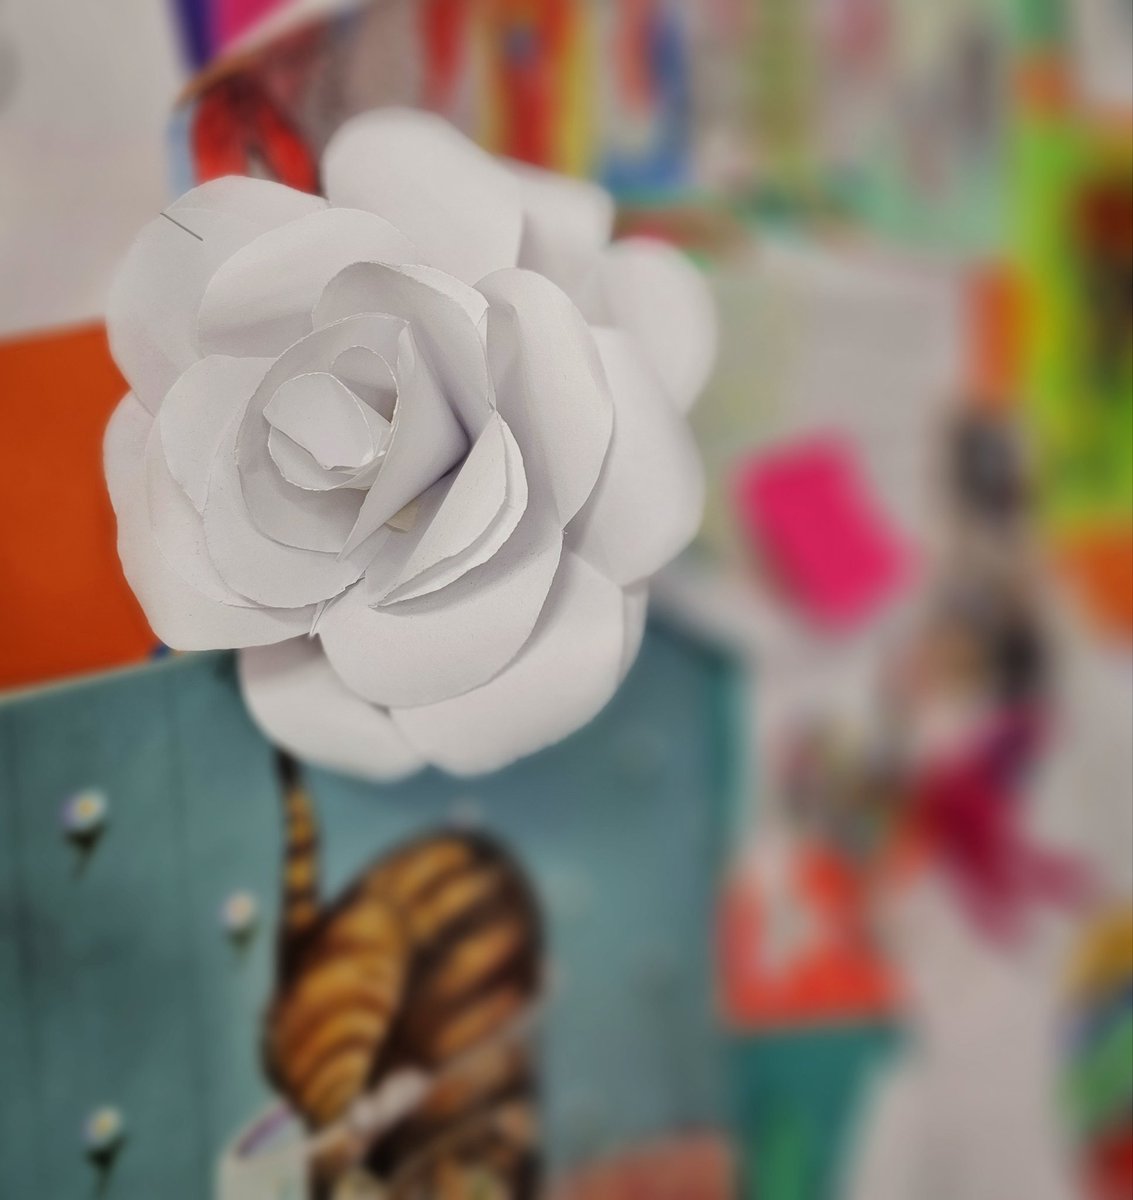 Thankful for drawings and even sculptural gifts given to me by students. This paper flower is AMAZING! This student is a joy to have in class, and a very good writer!
#positivityproject2024 @KedcARTS @KEDCGrants